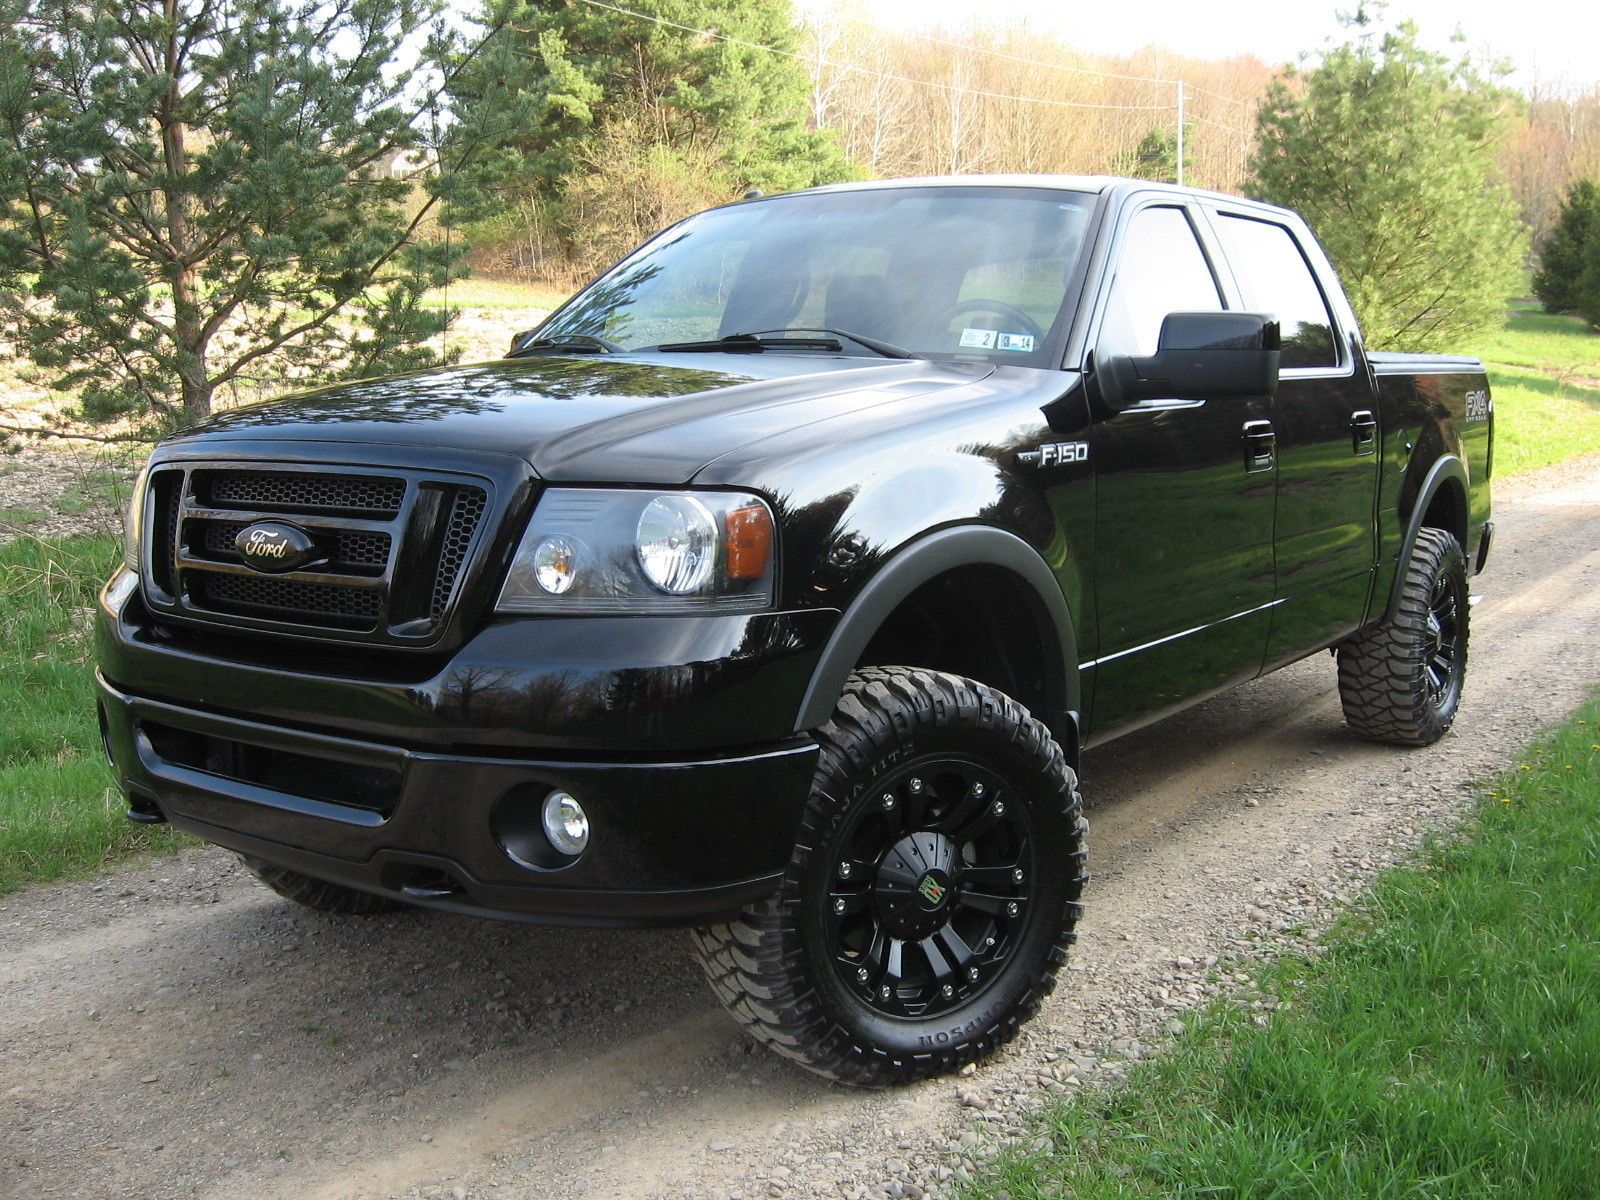 Ford f150 monster truck for sale #7